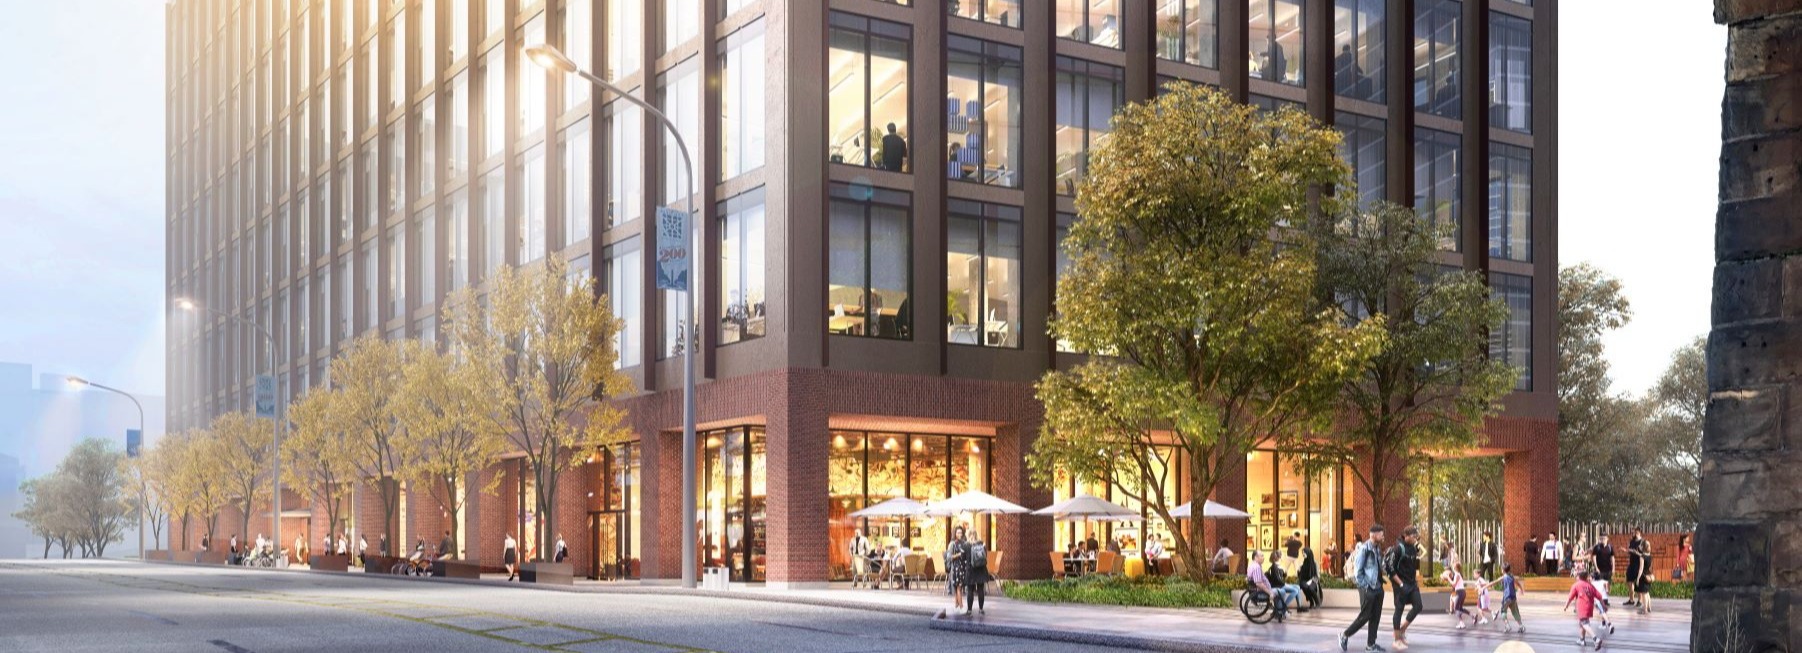 Global Law Firm Goodwin Signs Lease at 3025 JFK Blvd in Schuylkill Yards